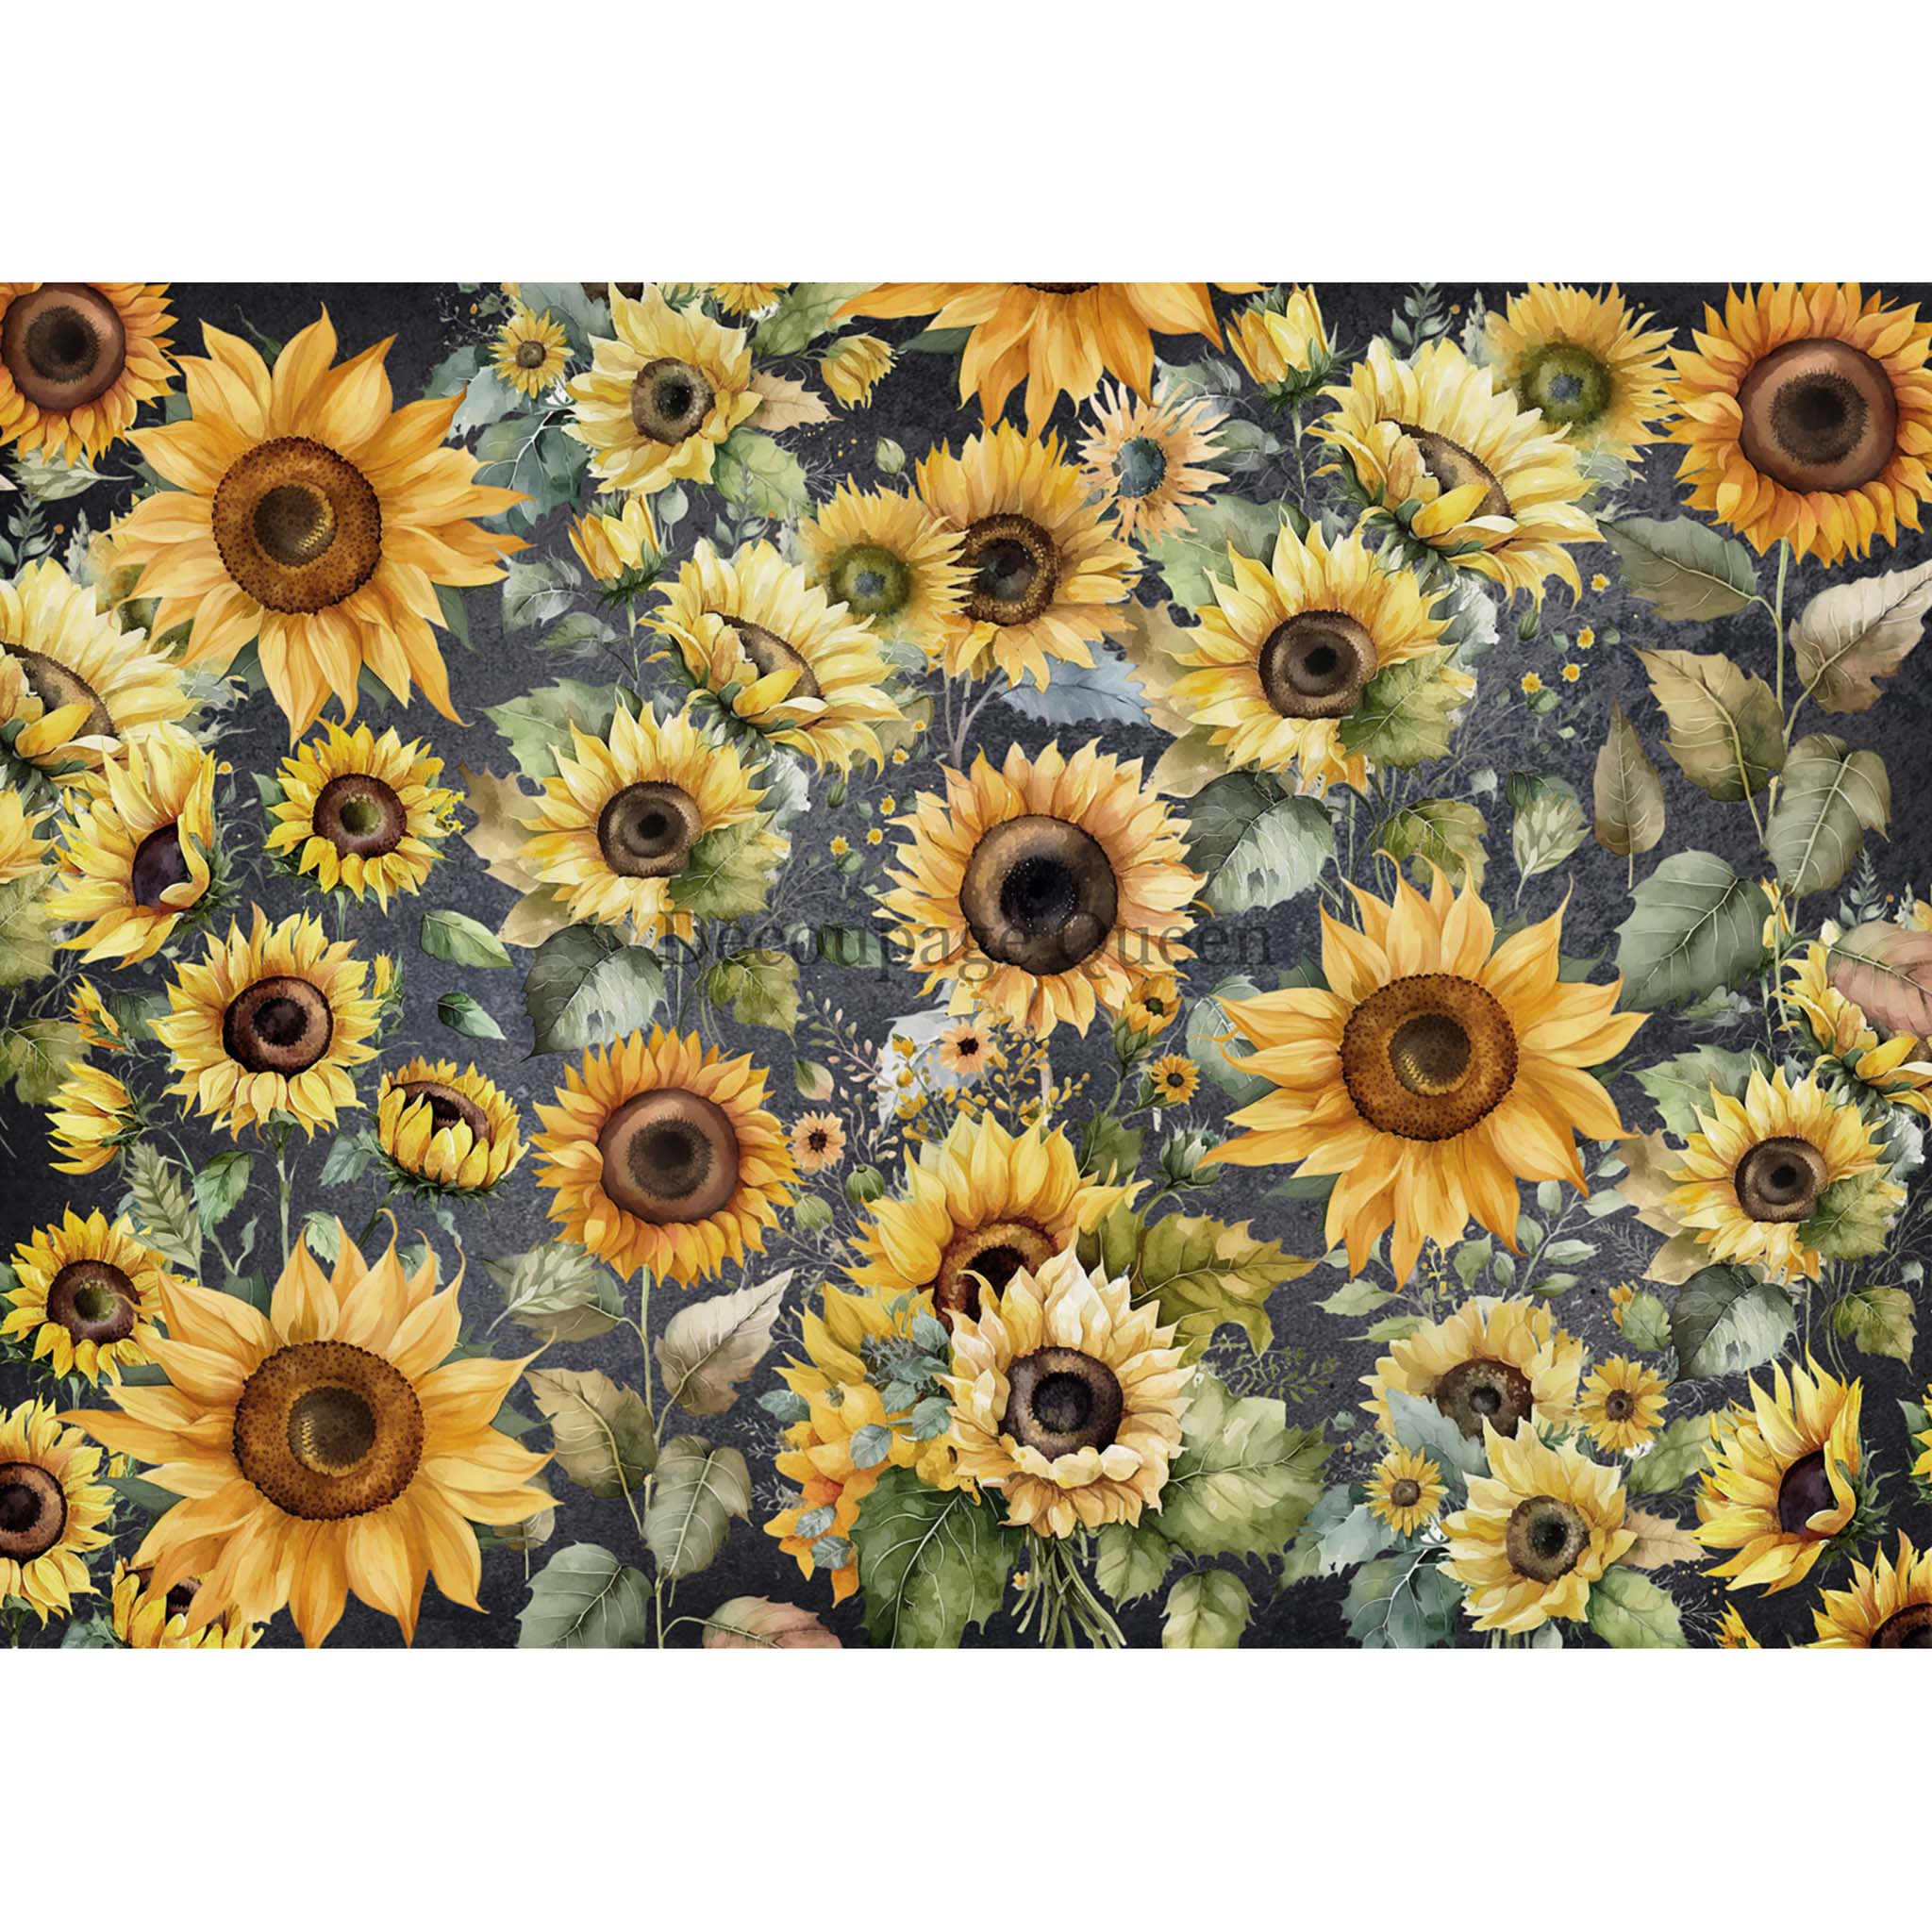 A2 rice paper design featuring cheerful sunflowers bursting across a grey background. White borders are on the top and bottom.